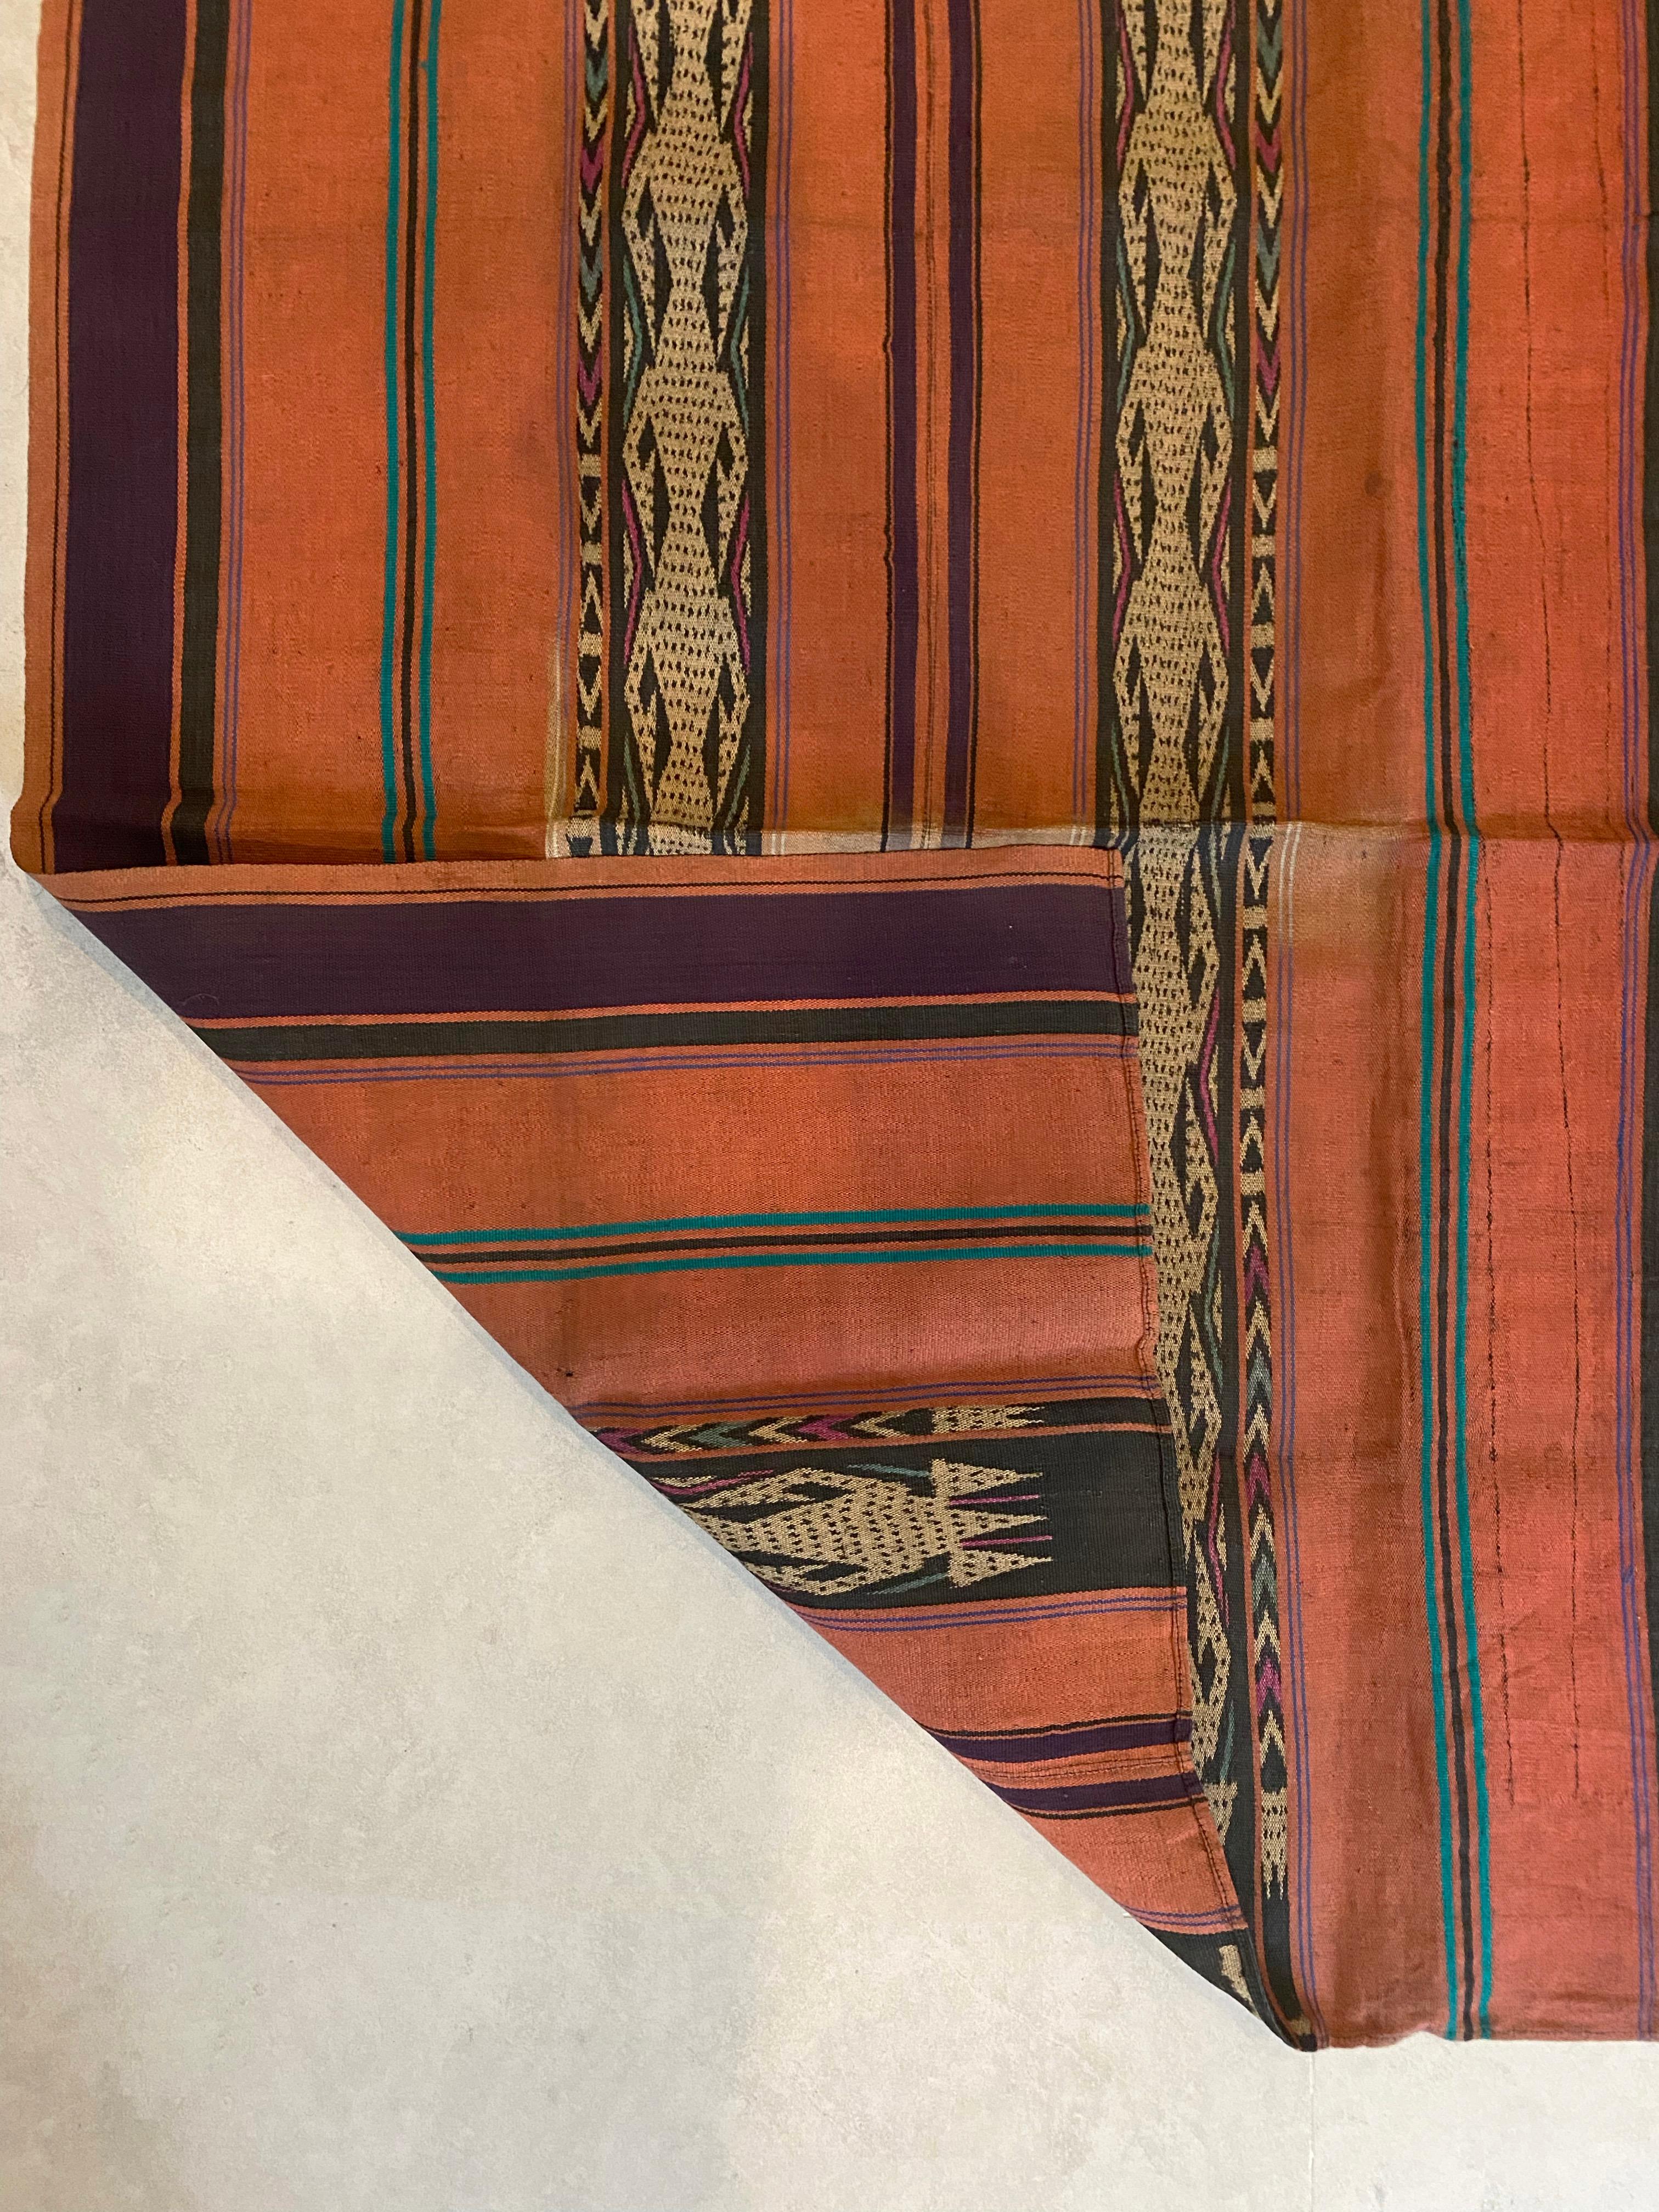 Hand-Woven Ikat Textile from Dayak Tribe, Kalimantan, Indonesia For Sale